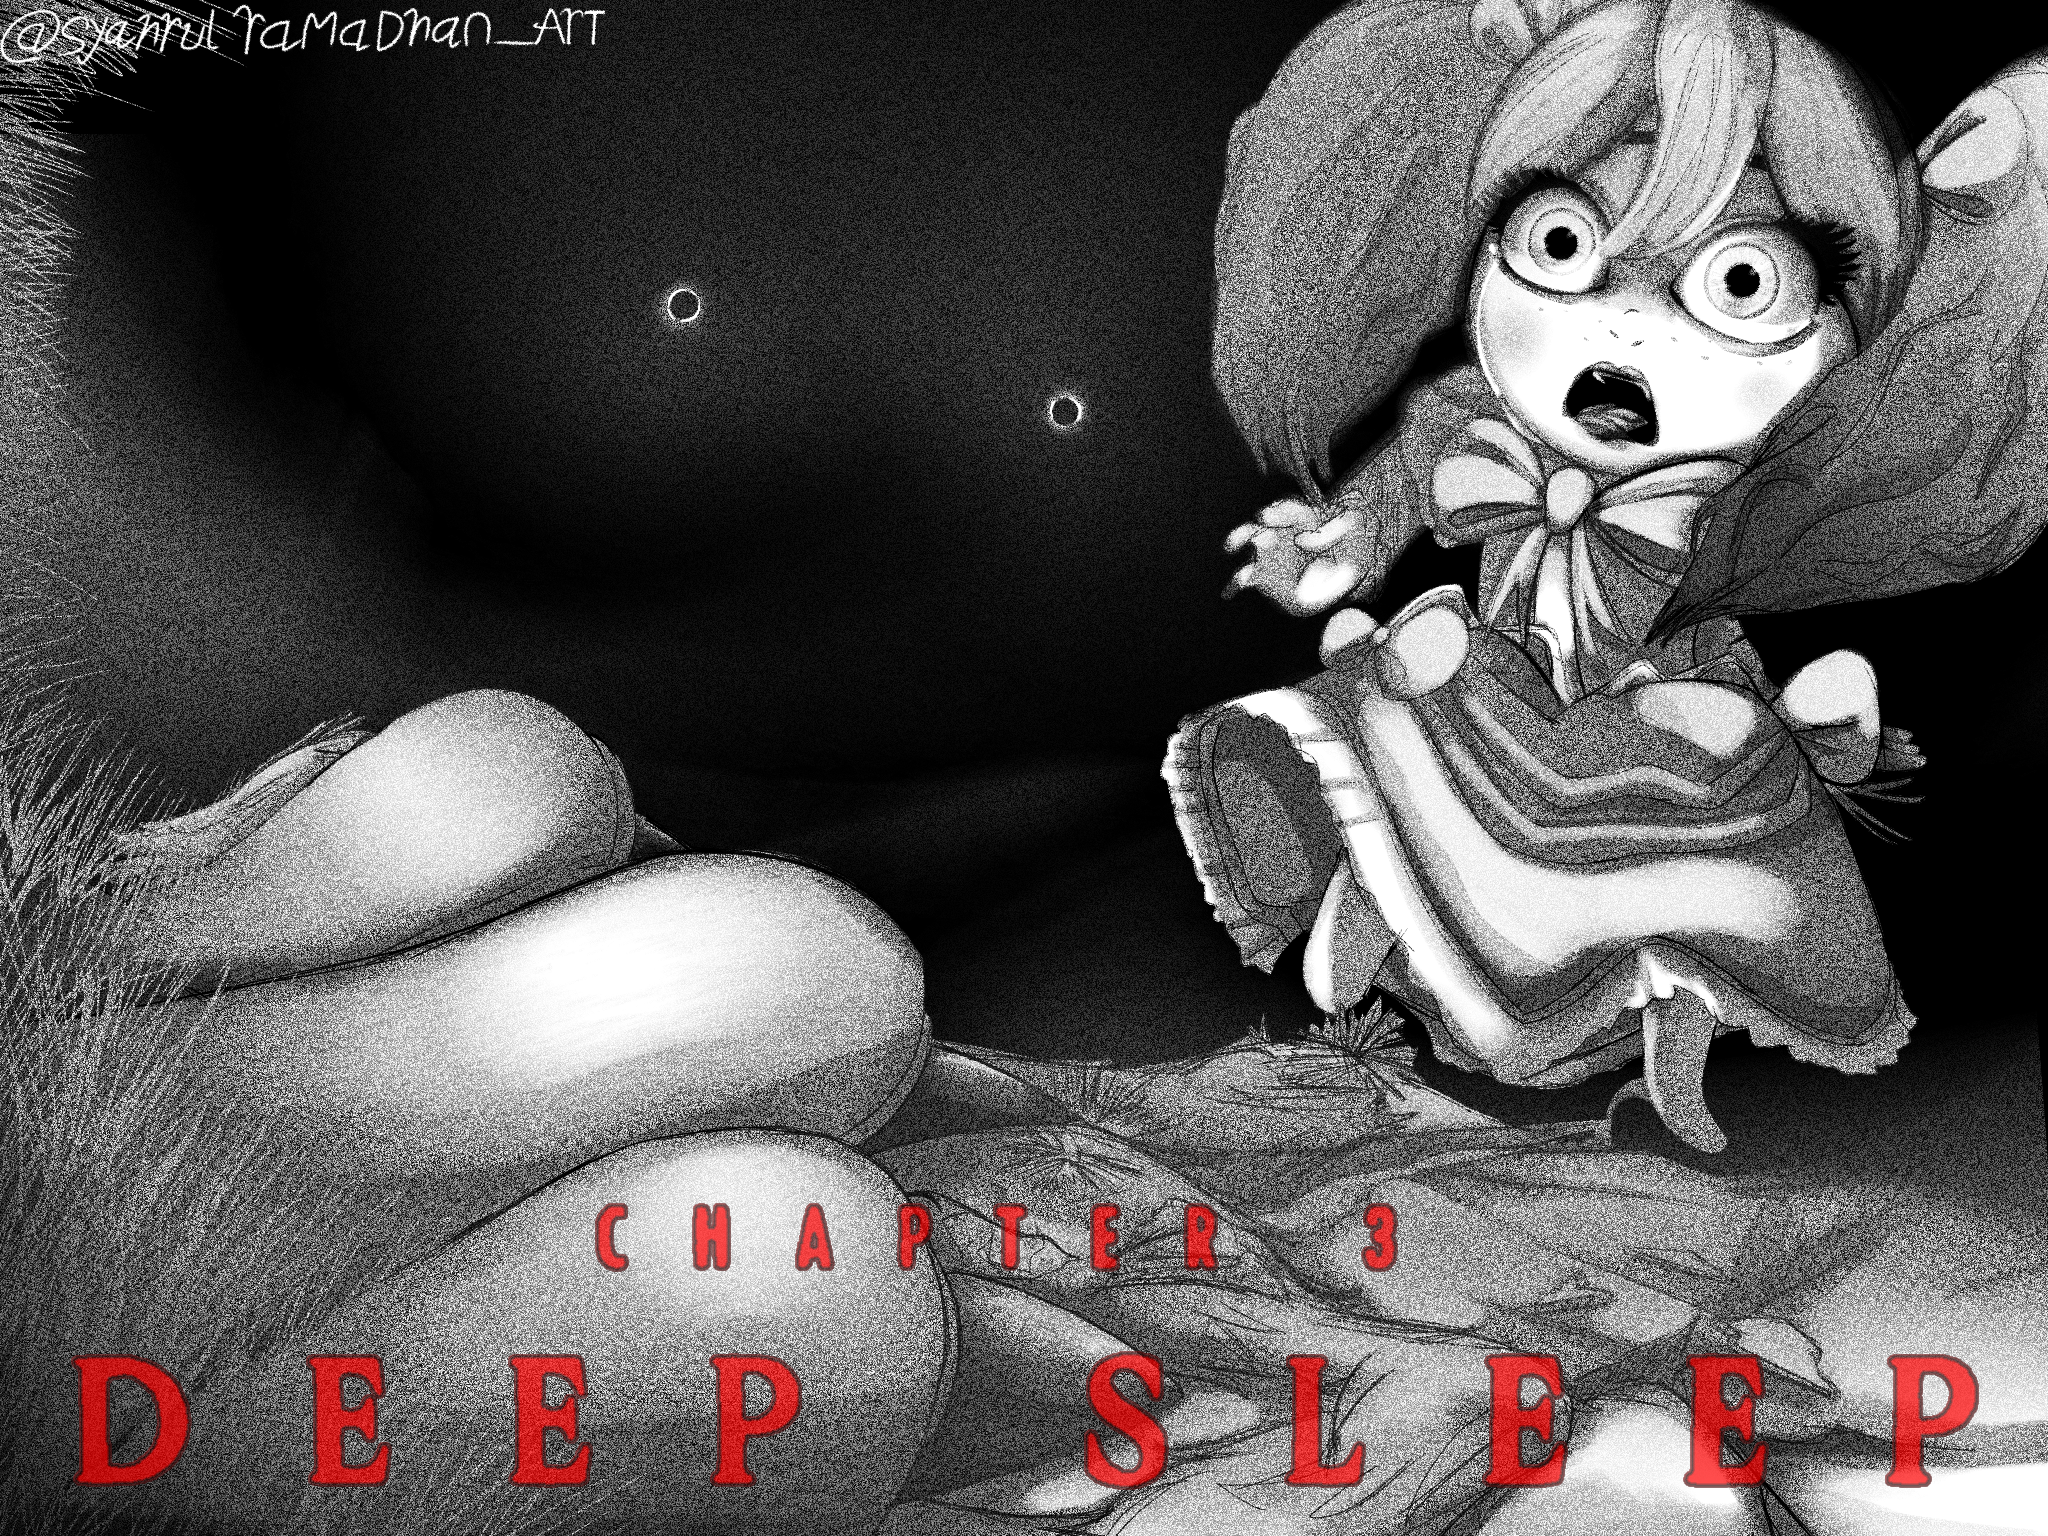 Catnap  Poppy Playtime Chapter 3 - Deep Sleep by MYUI-MO on